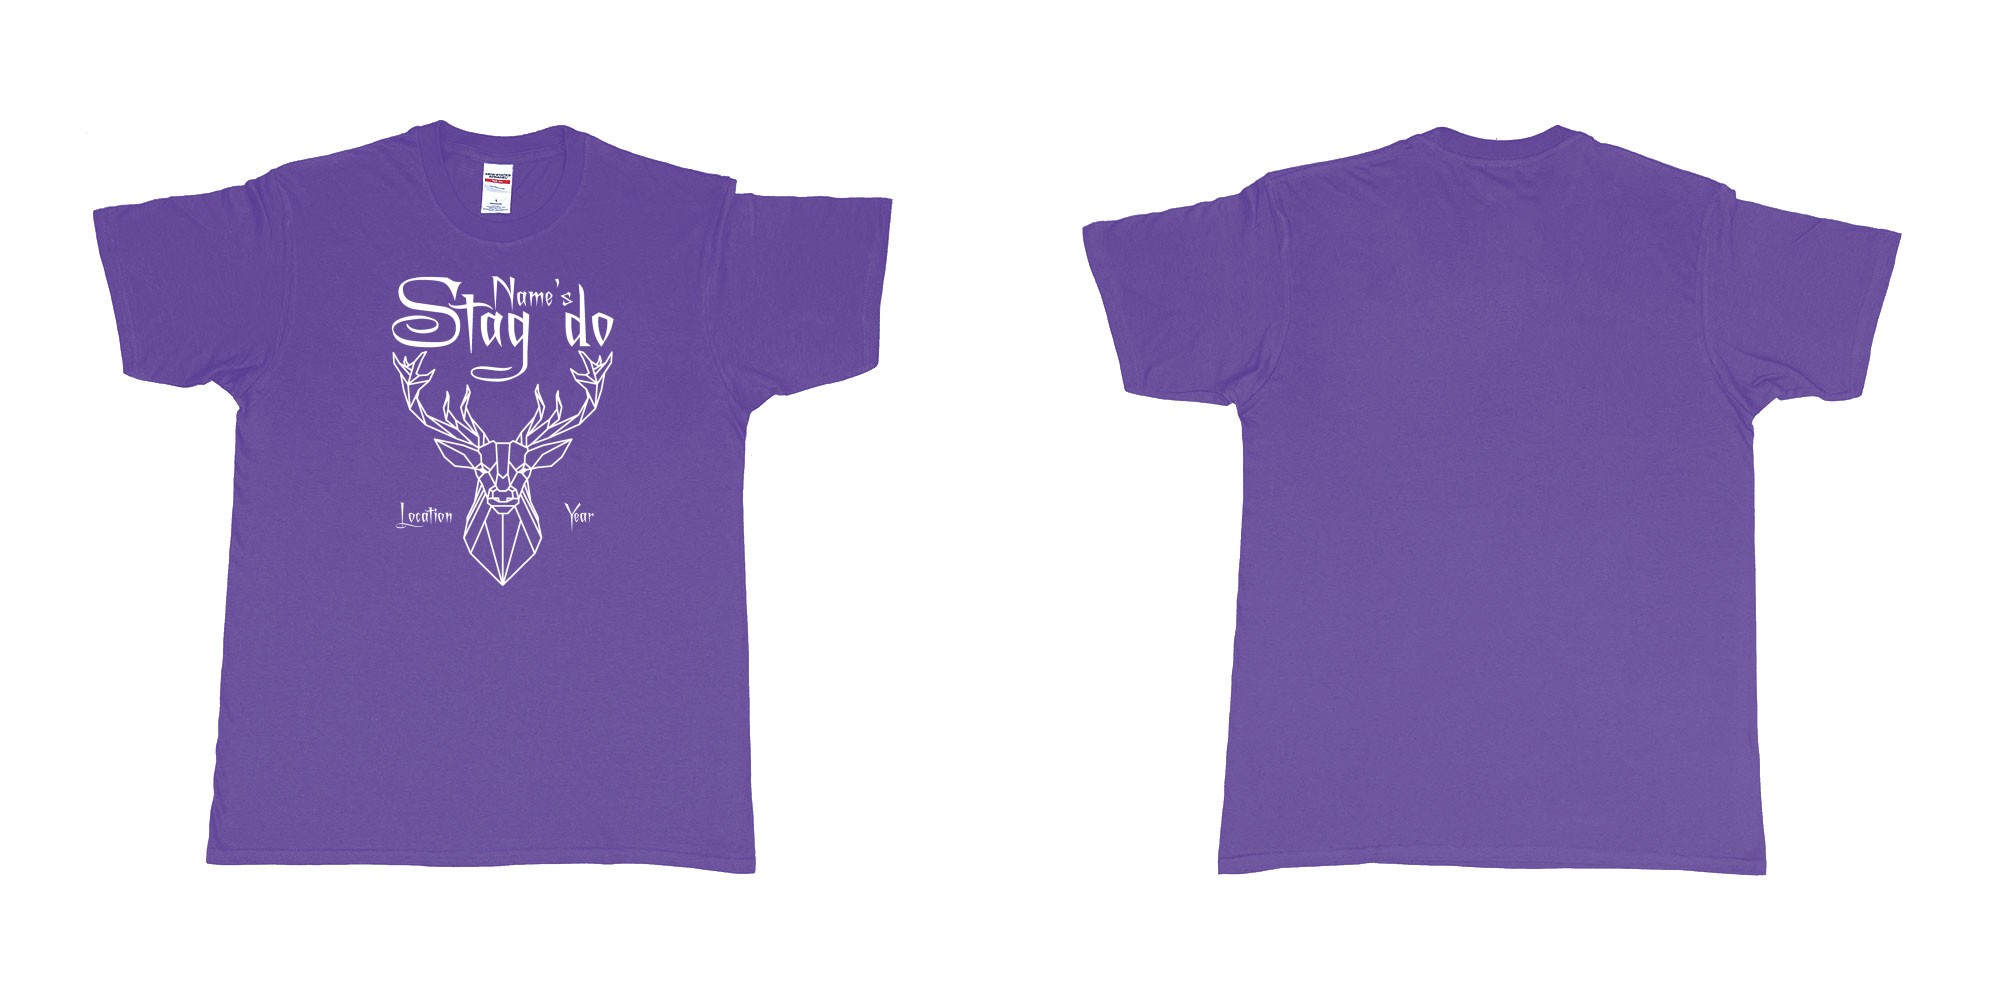 Custom tshirt design stag do design custom location year in fabric color purple choice your own text made in Bali by The Pirate Way